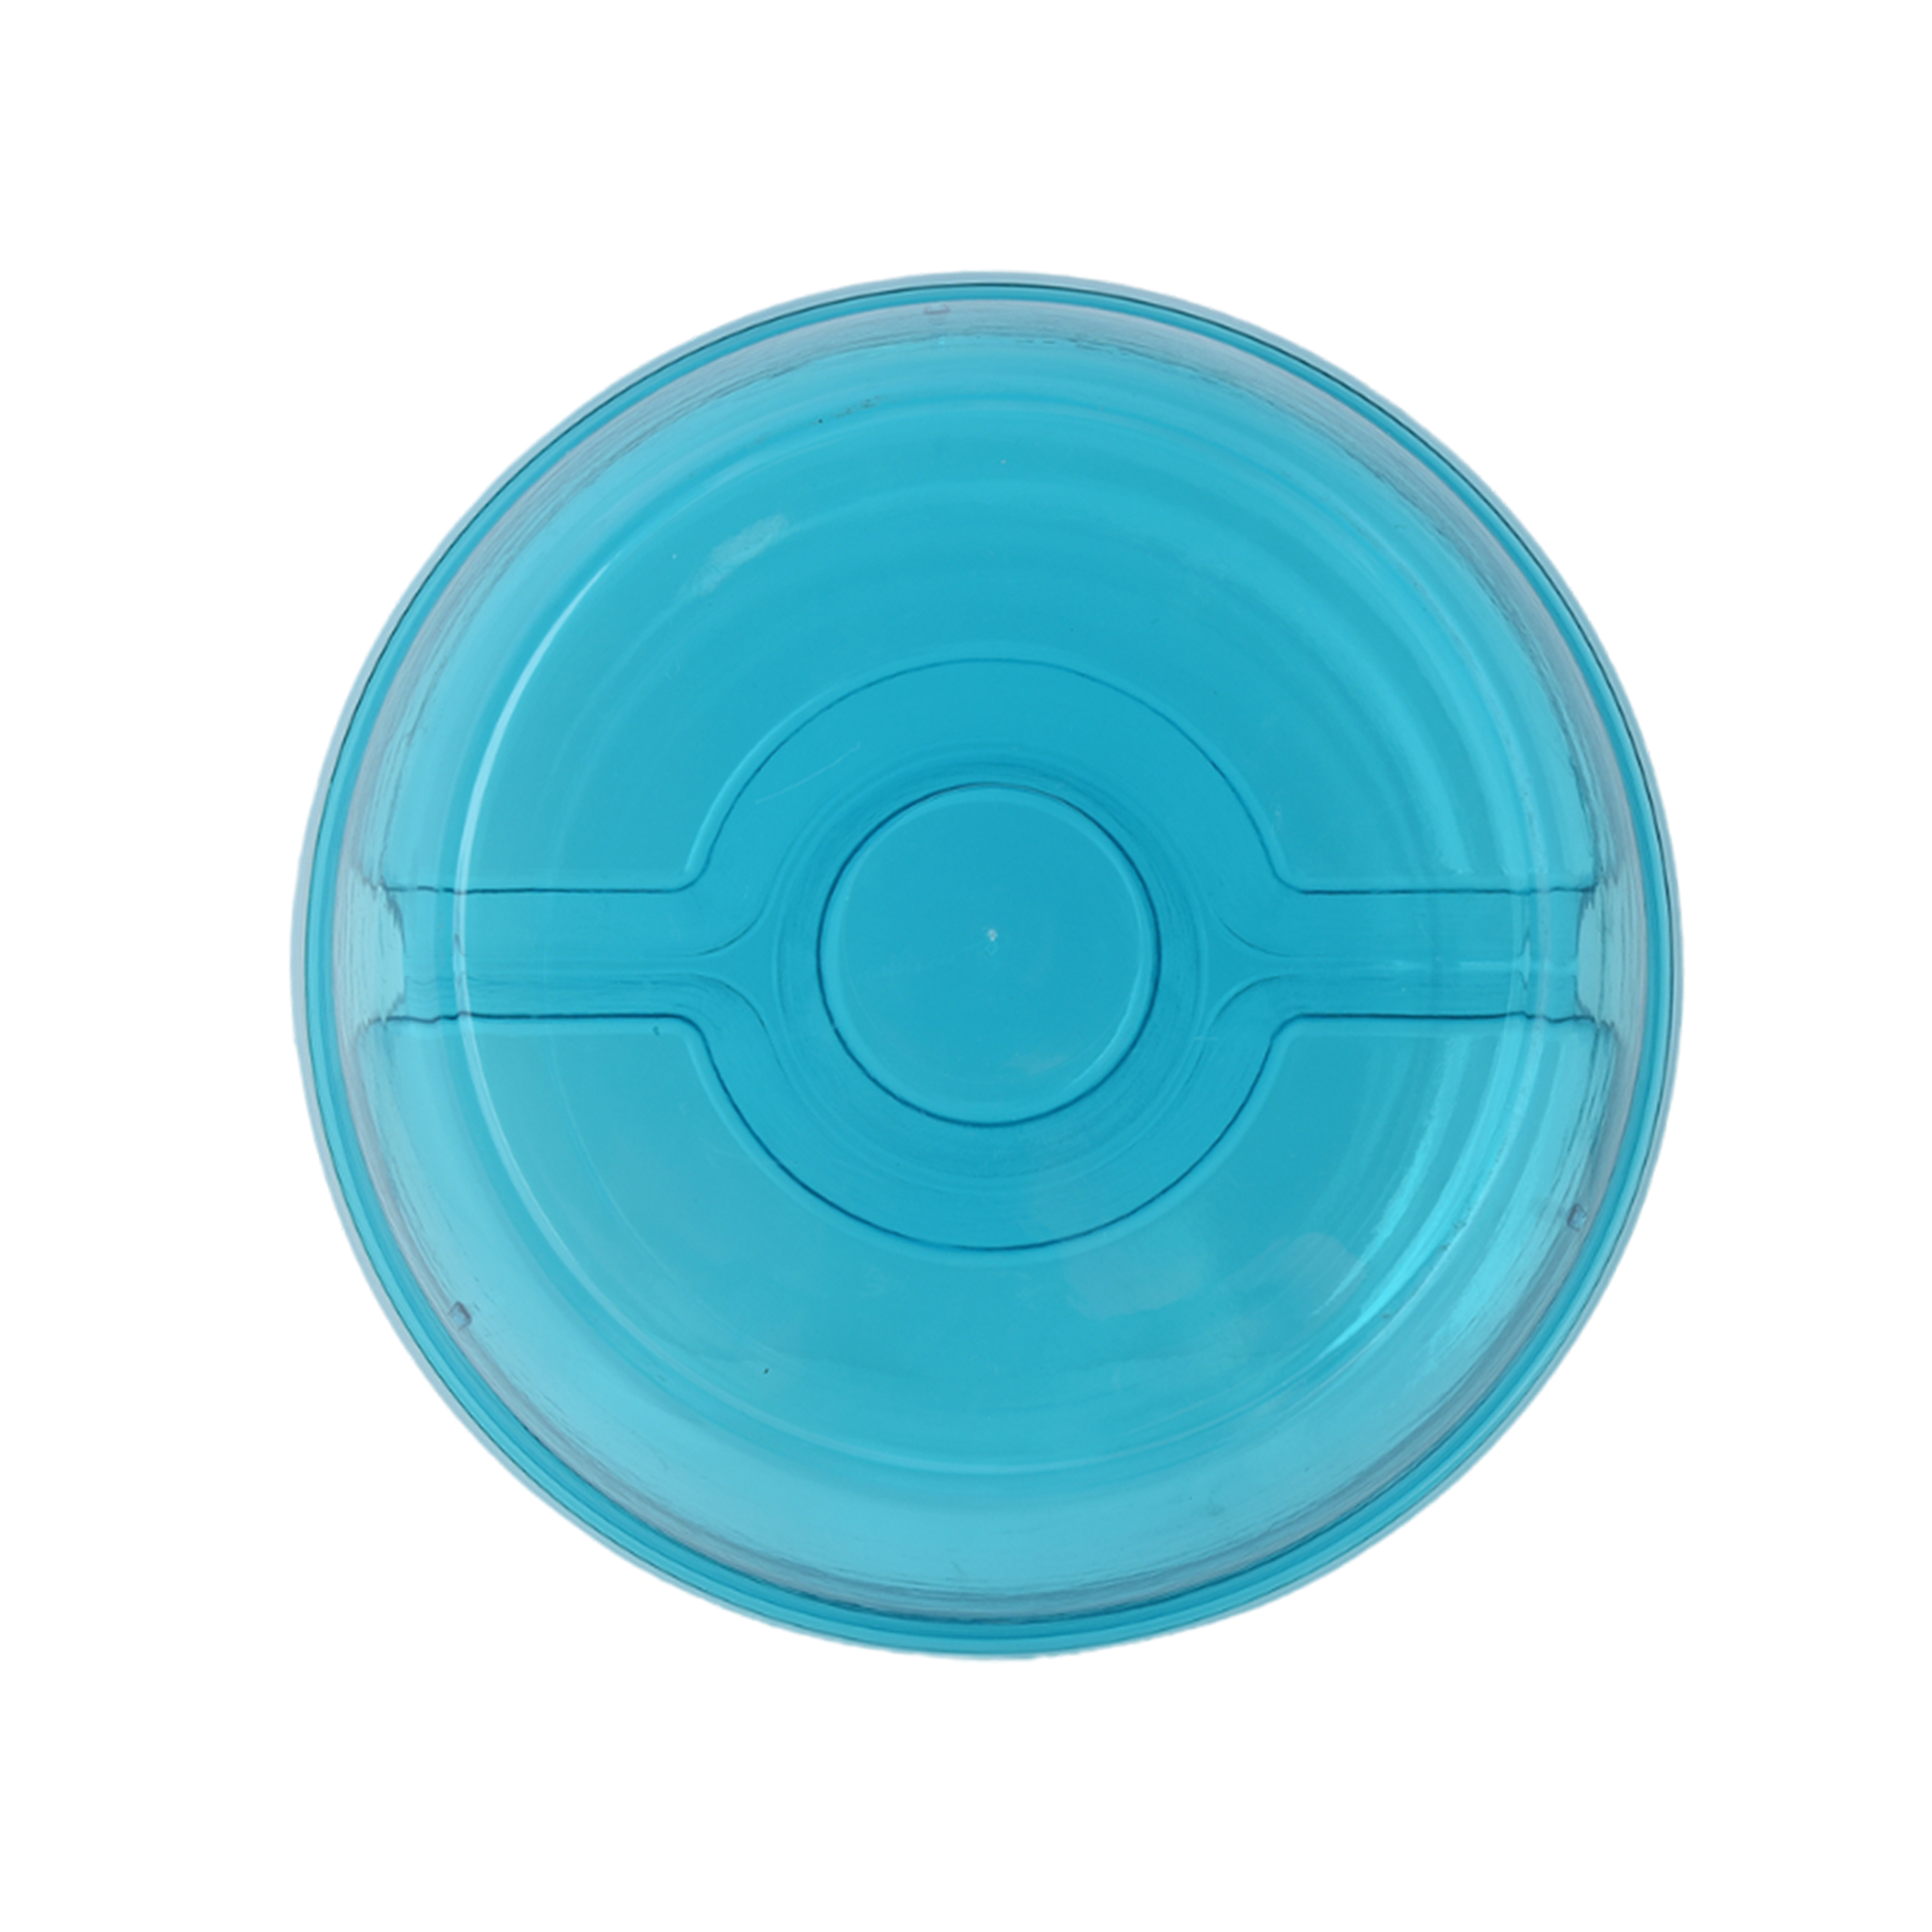 Mainstays Acrylic Appetizer On Ice Serving Tray with Lid, Blue - image 5 of 8